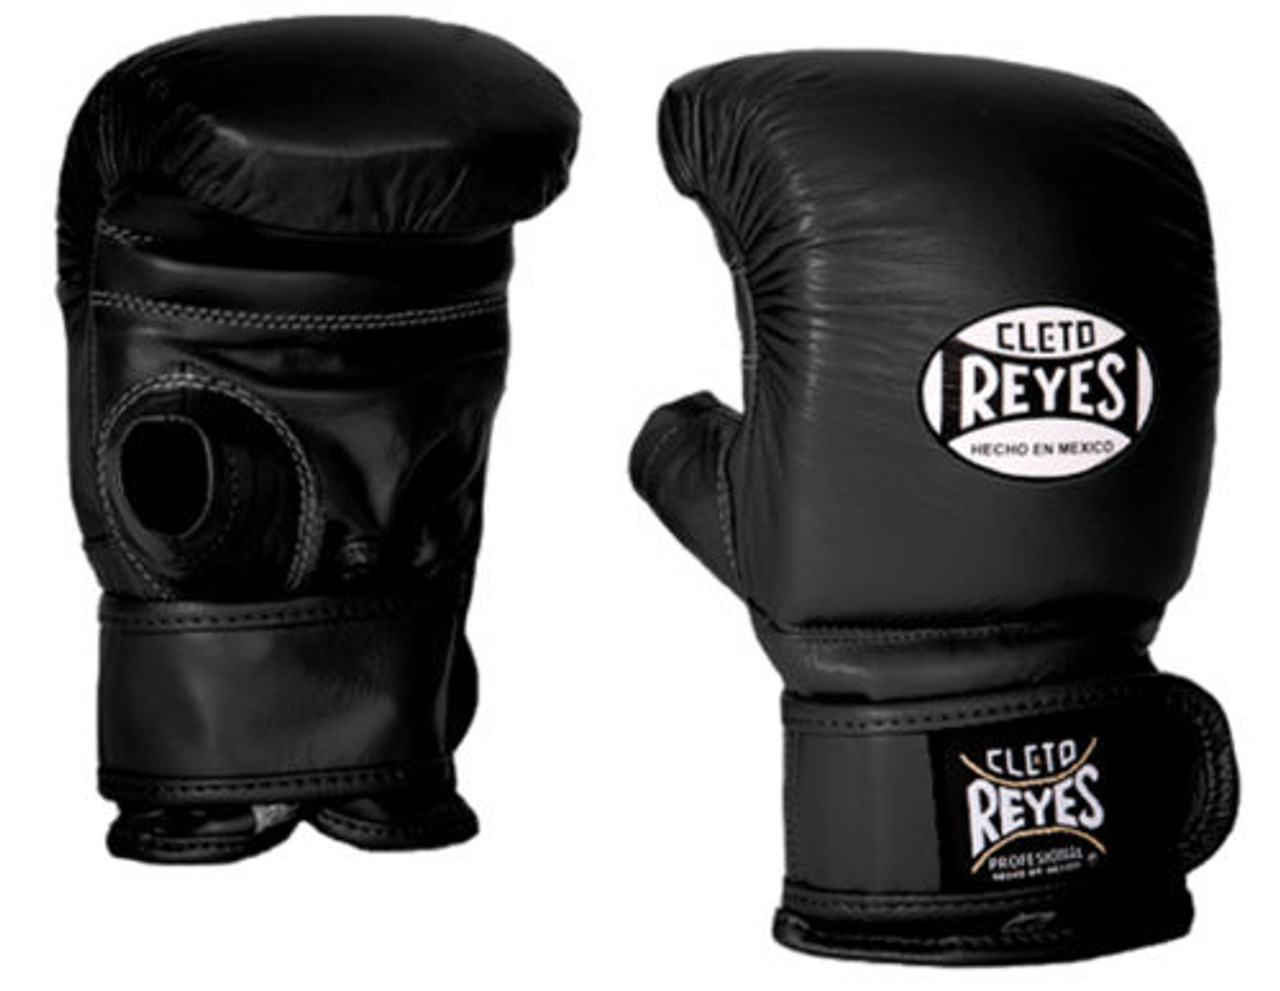 Cleto Reyes Leather Boxing Bag Gloves with Hook and Loop Closure - Black -  USA Fight Shop